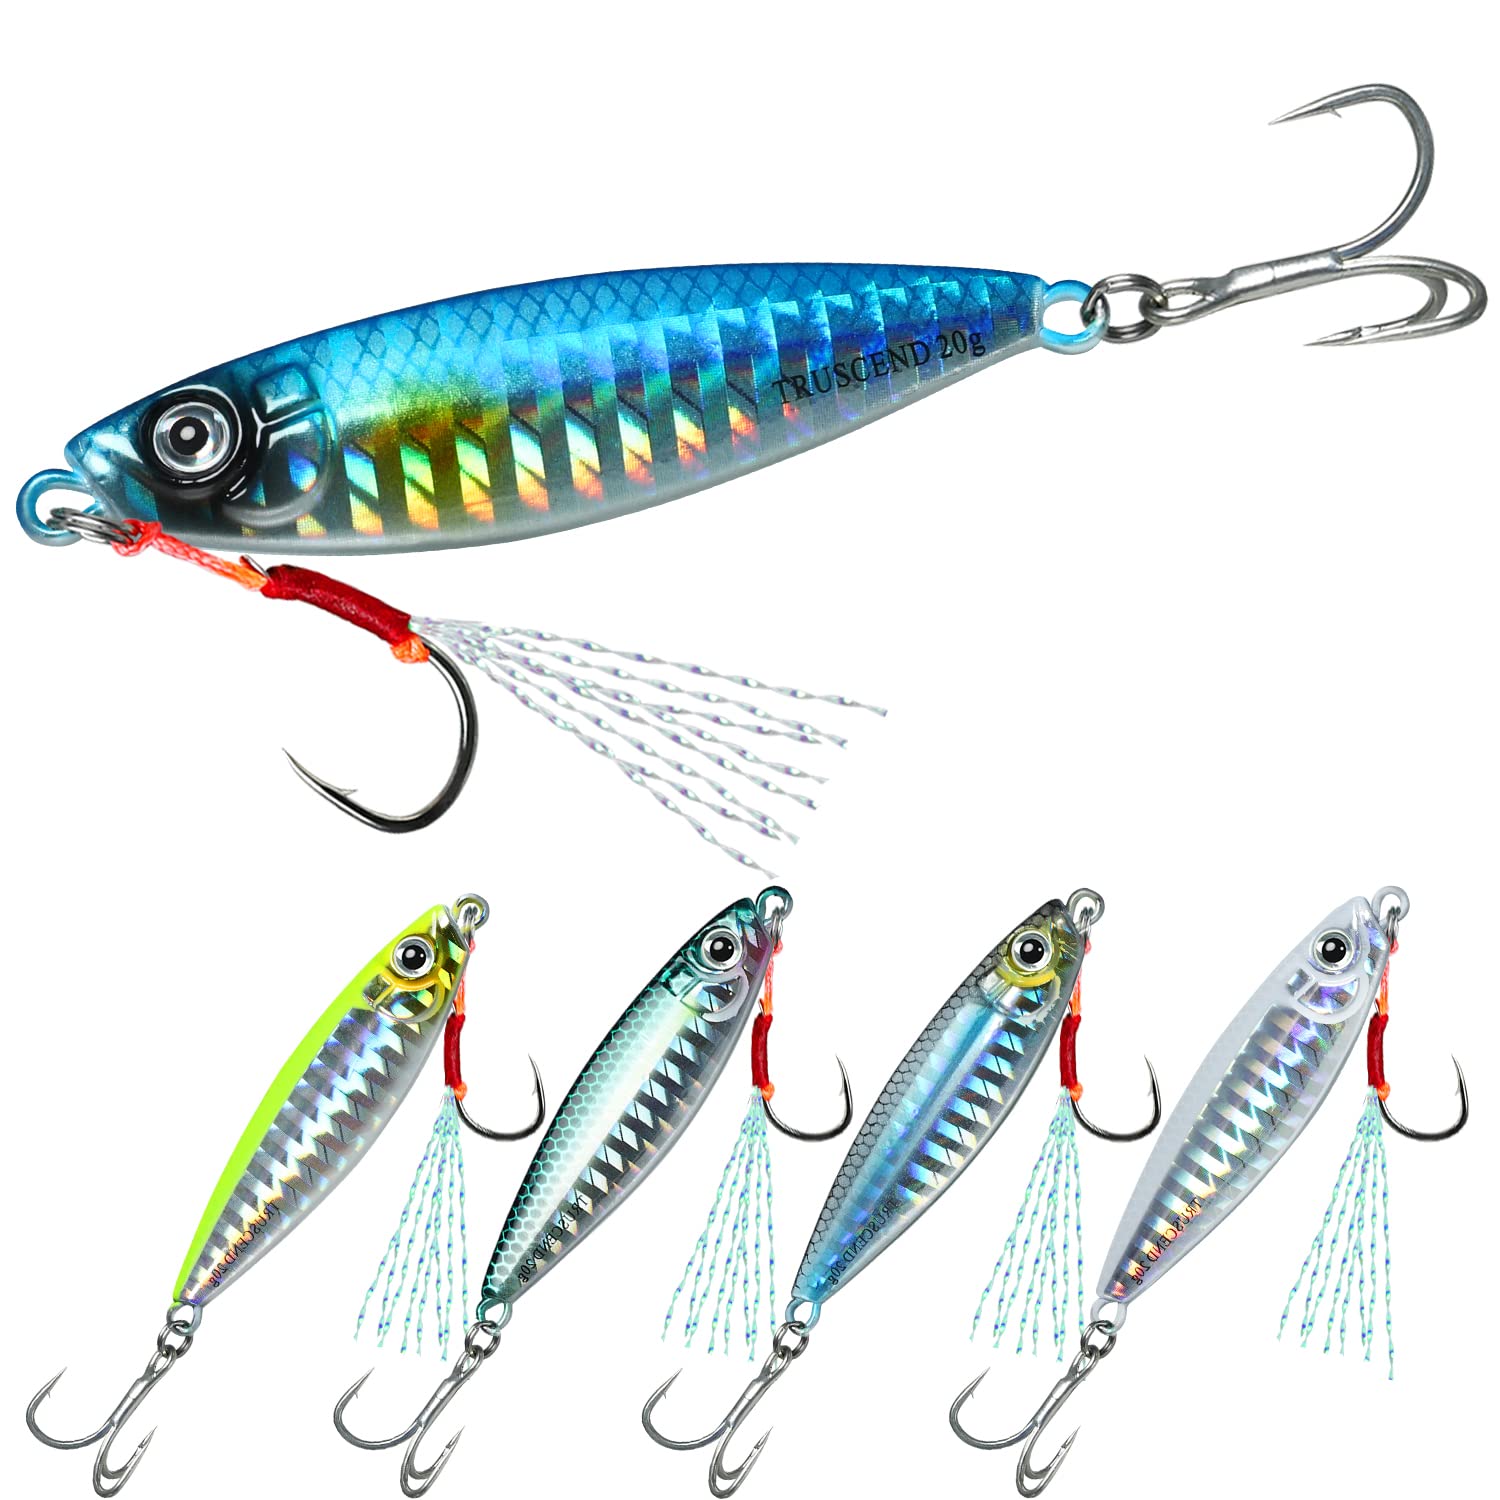 TRUSCEND Flipping Jigs Fishing Lures with Teflon Coated Ultra Smooth Sharp  BKK Hook, Multi-Color Skirted